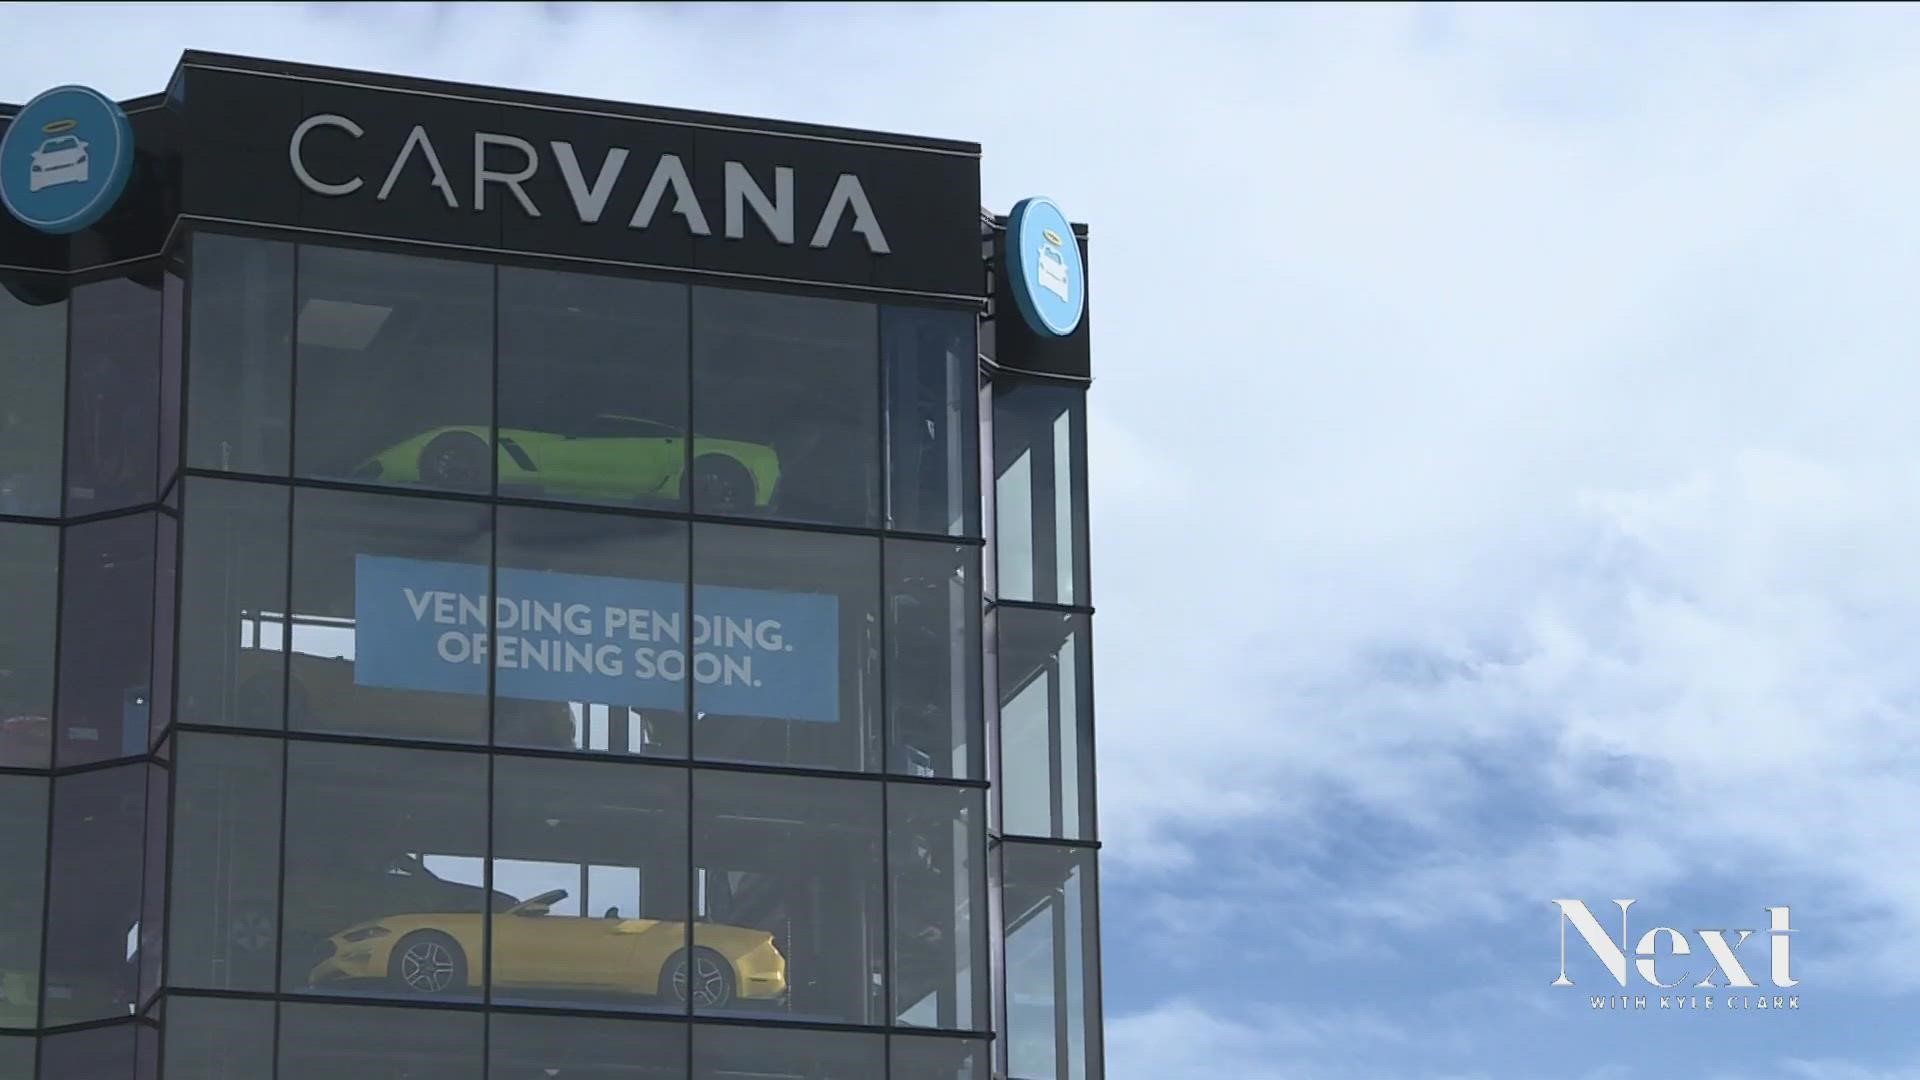 The Carvana vending machine along Interstate 25 near Evans Avenue, which sat empty for months after construction, was filled with cars Thursday morning.